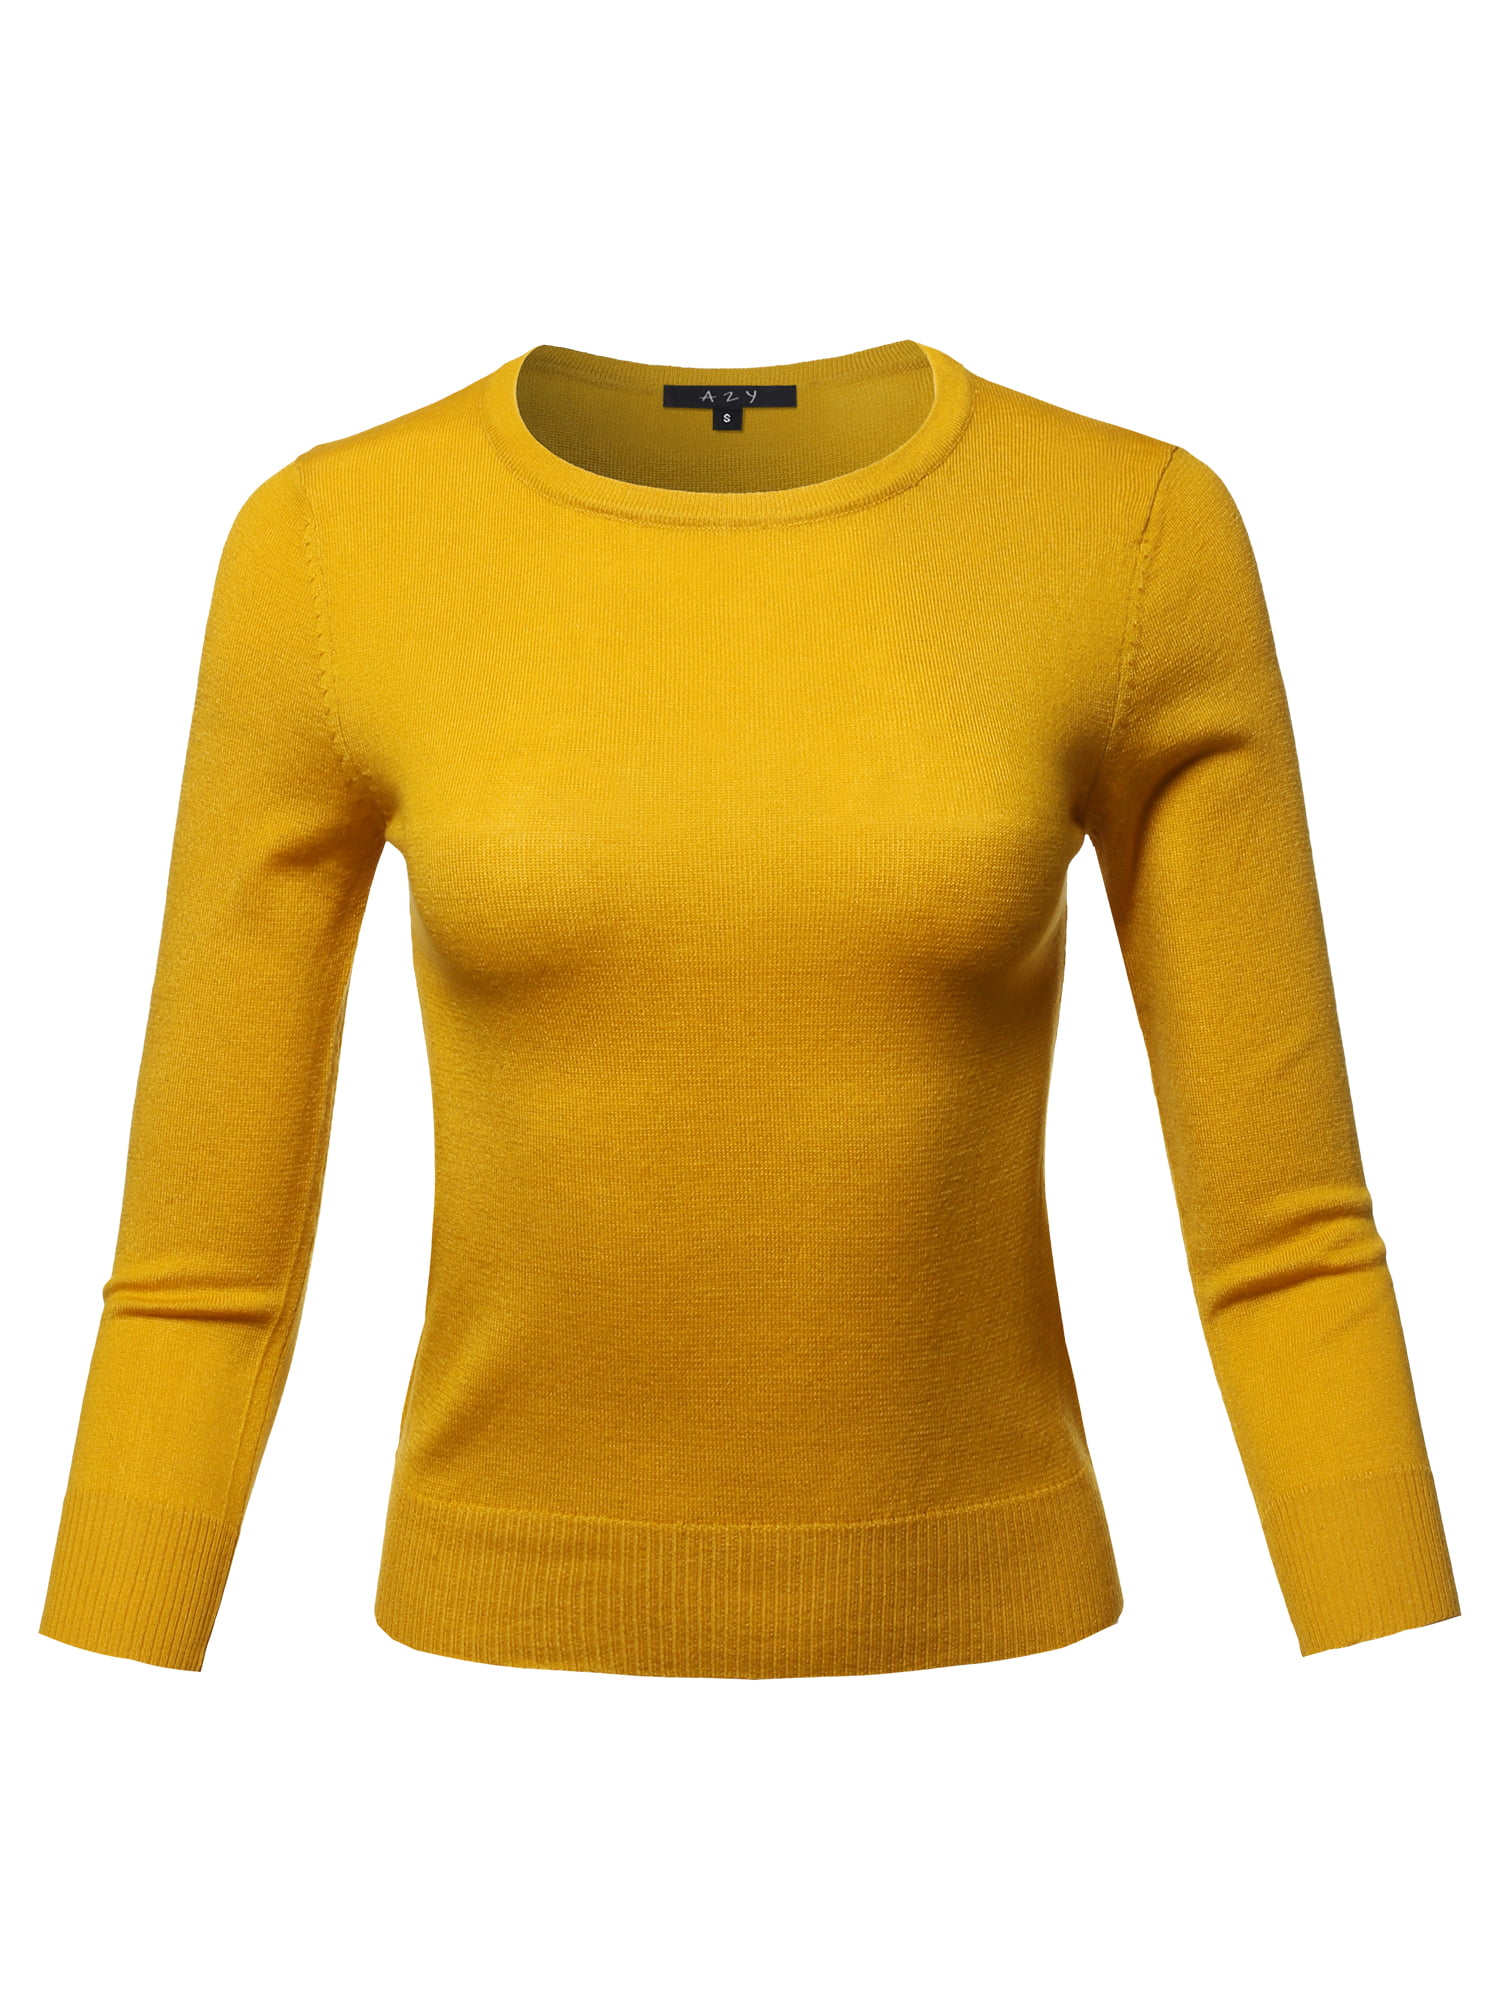 A2Y Women's Basic Casual Colorful 3/4 Sleeve Knit Pullover Sweator Top ...